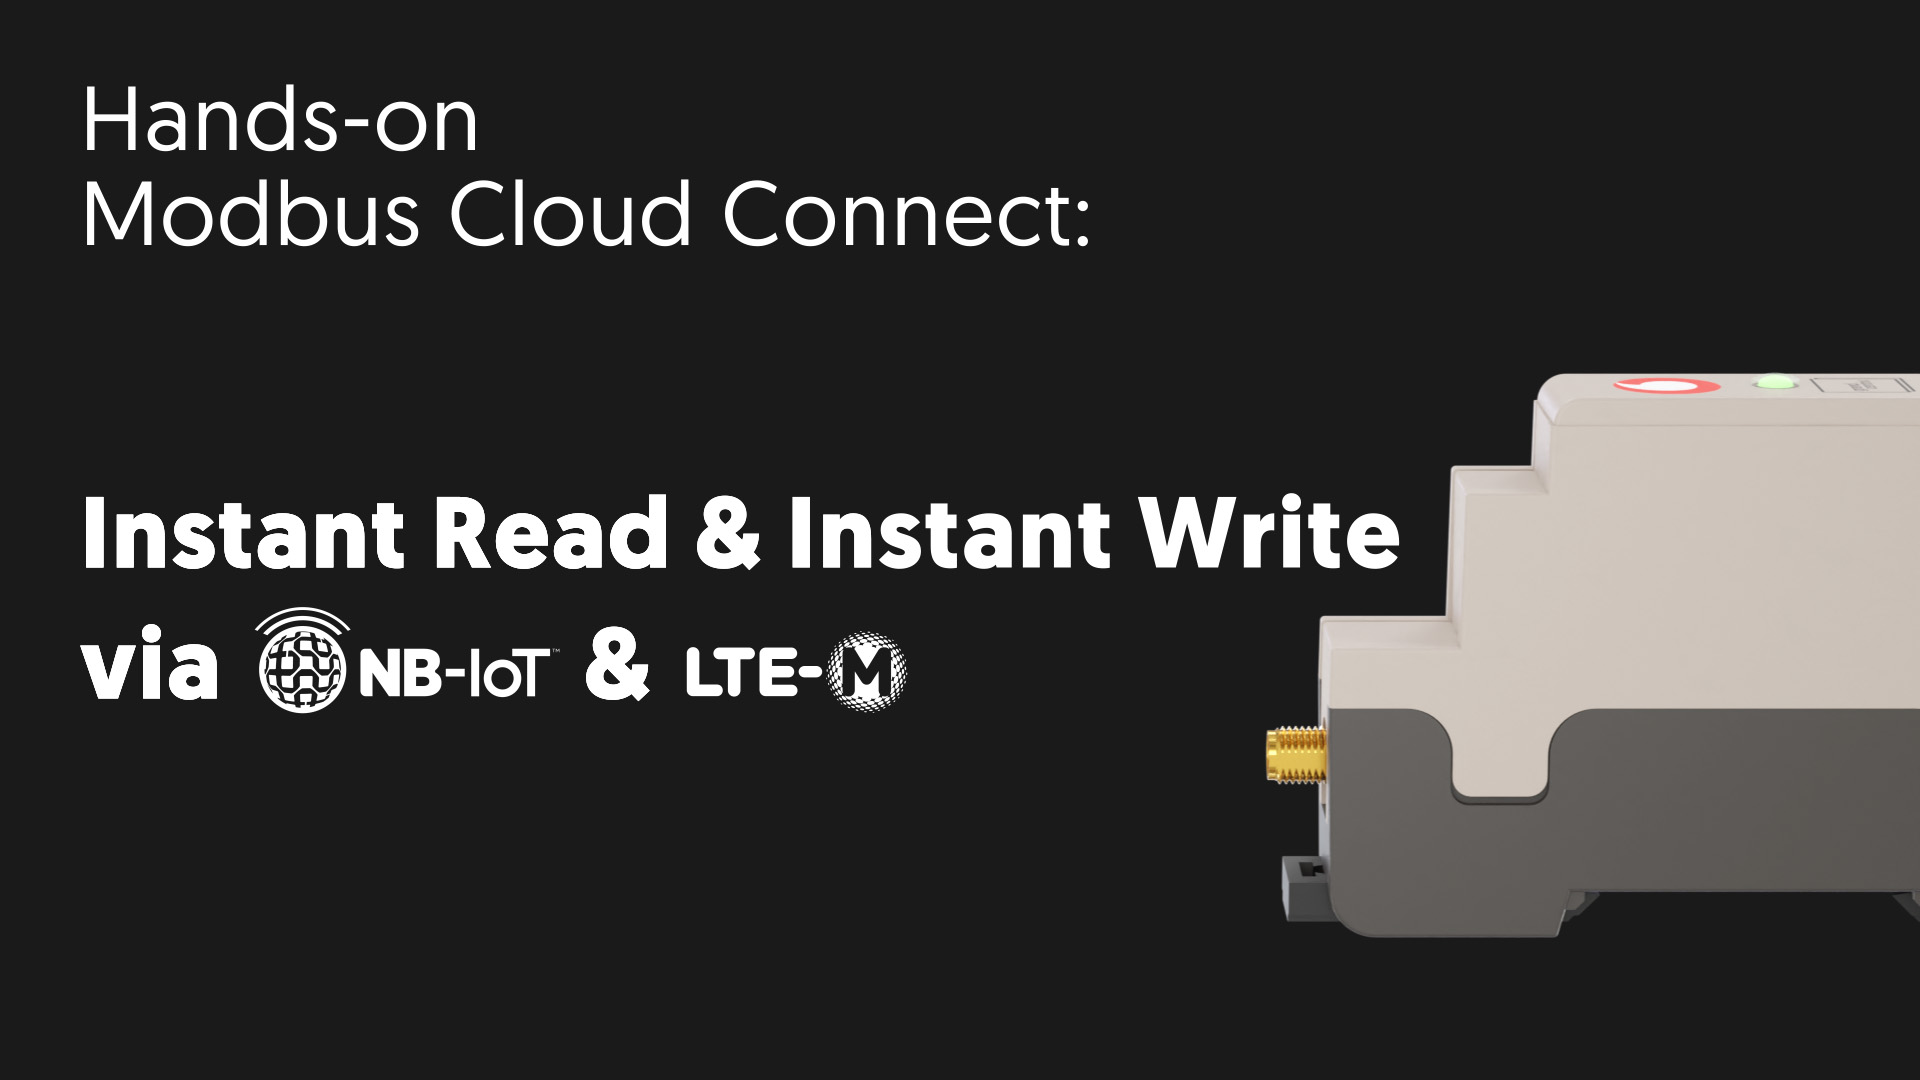 Hands-On Modbus Cloud Connect - Instant Read & Instant Write via Narrowband-IoT